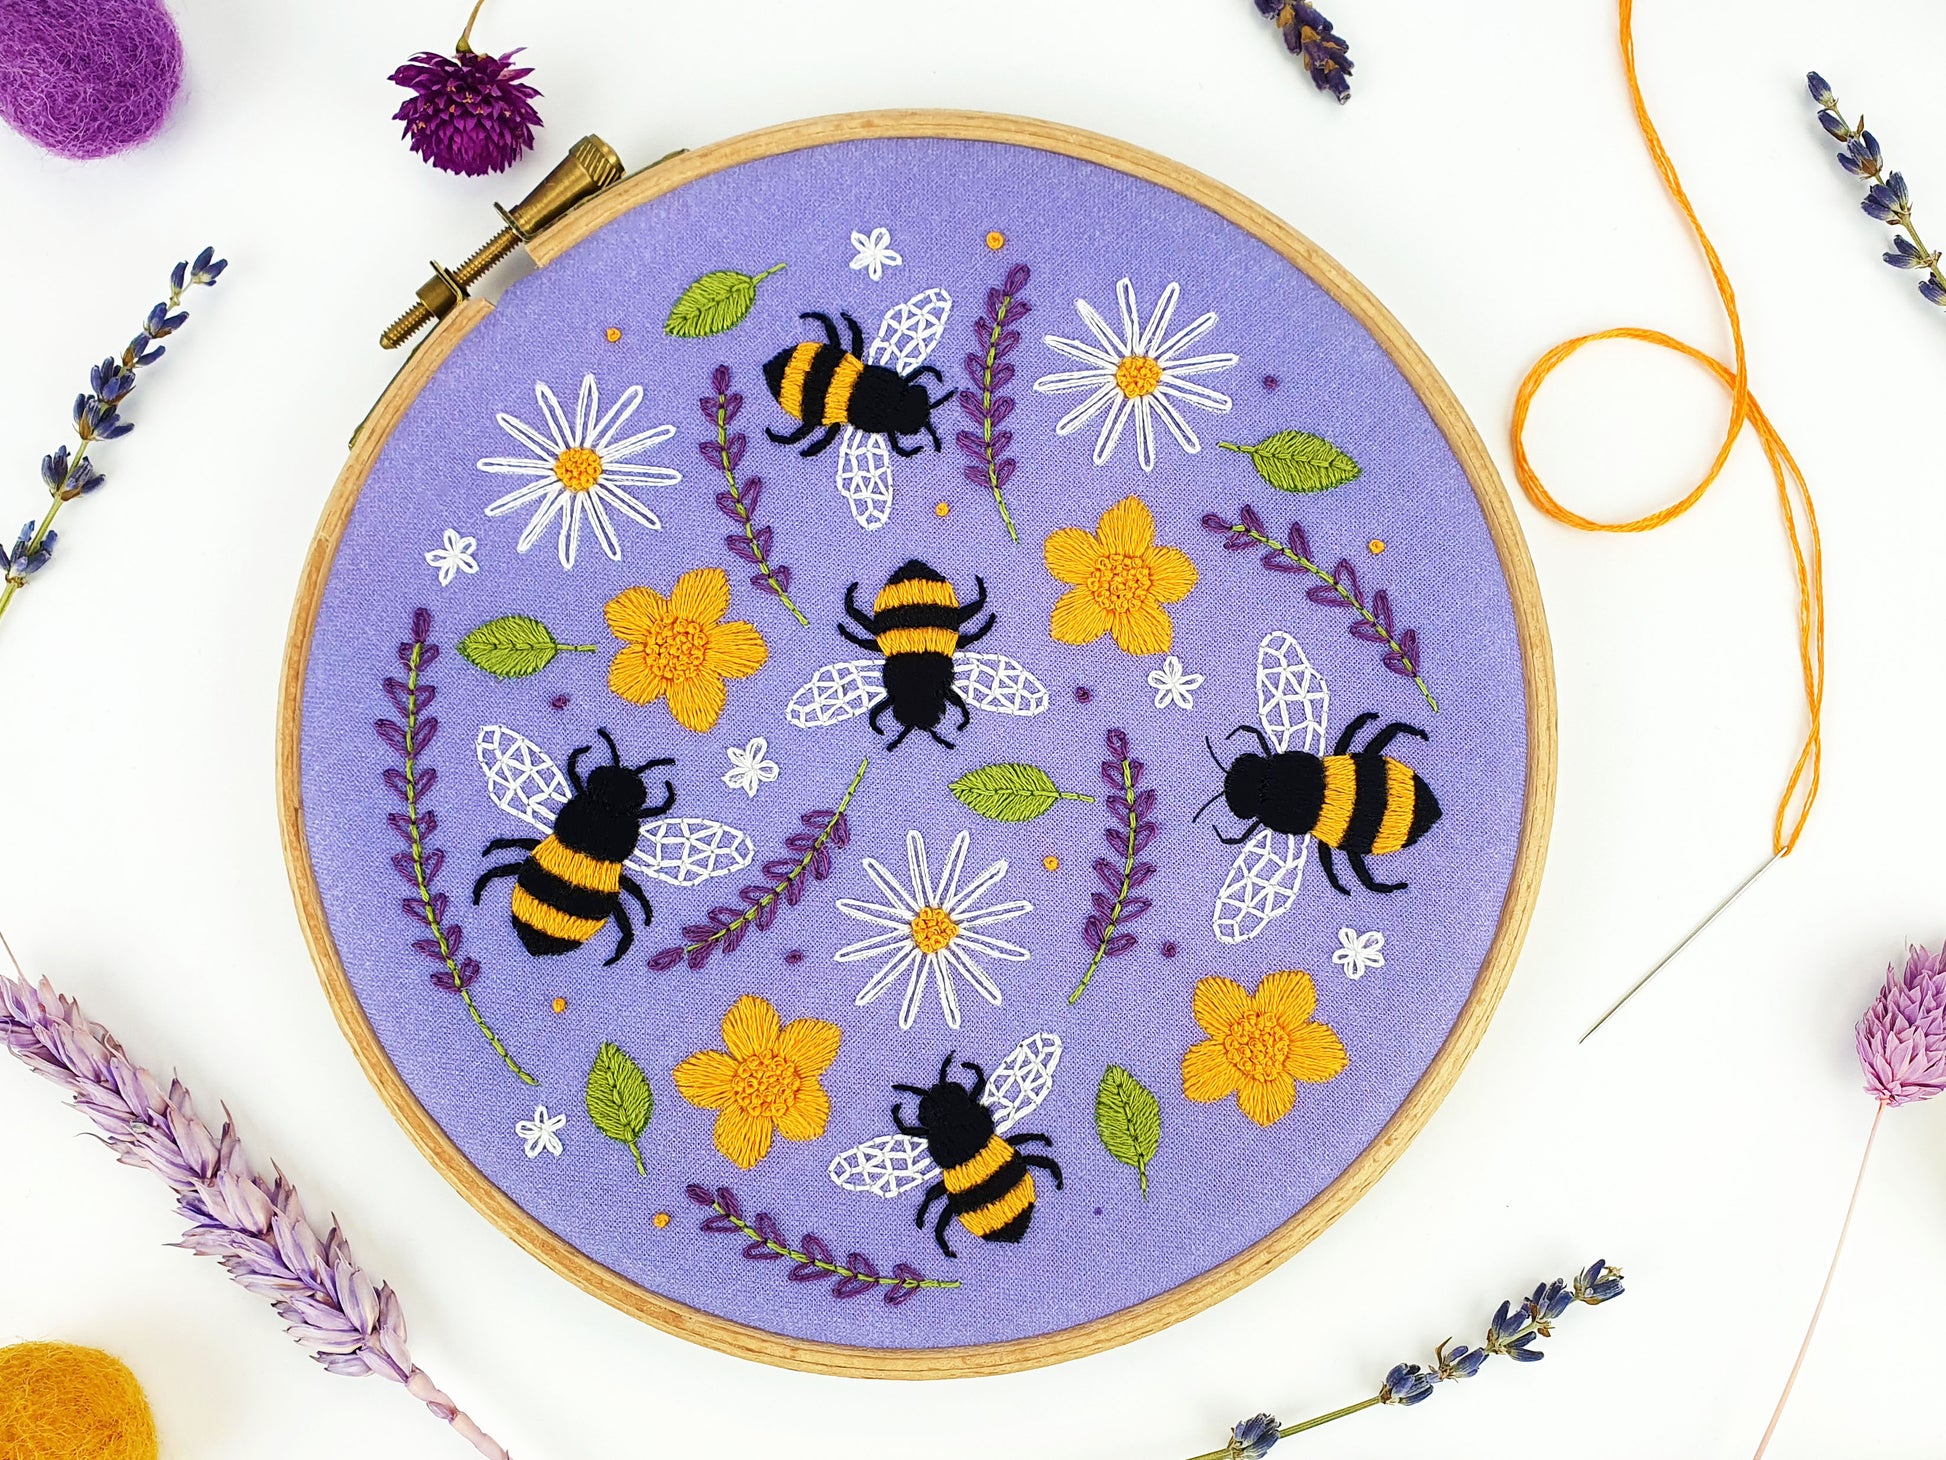 Bees and Lavender Embroidery Kit - Embroidery Kits - ohsewbootiful